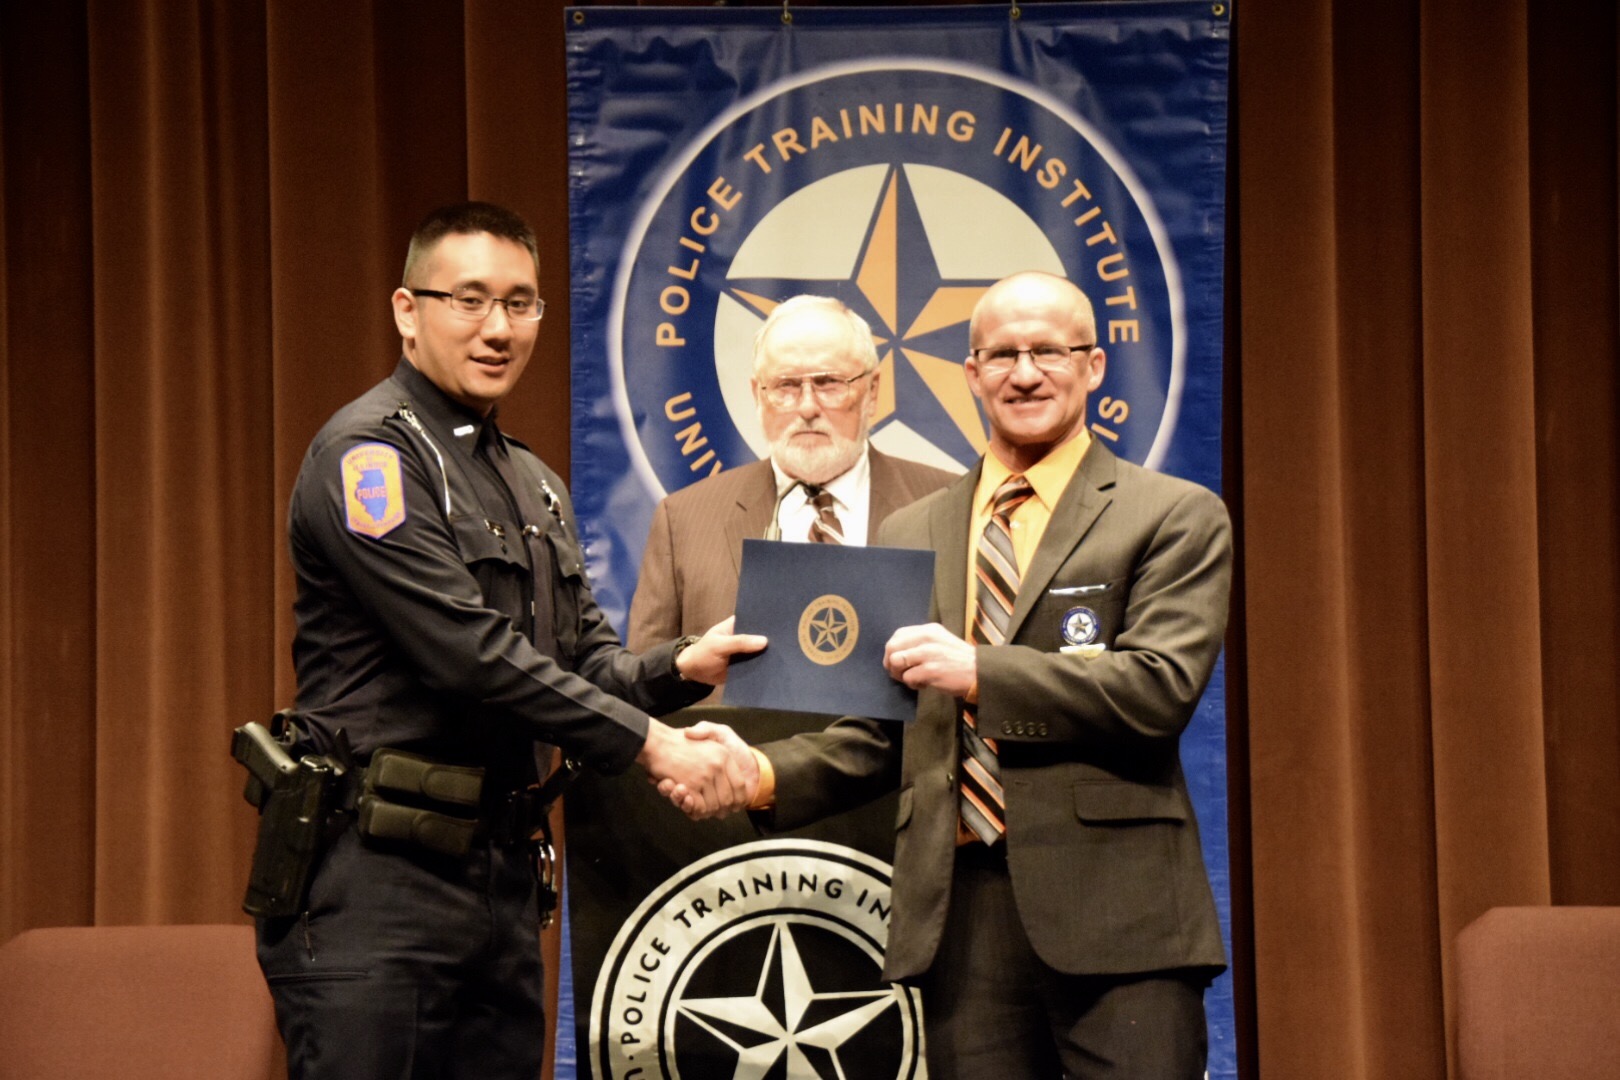 Alex Tran receiving his diploma from Police Training Institute Director Michael Schlosser.